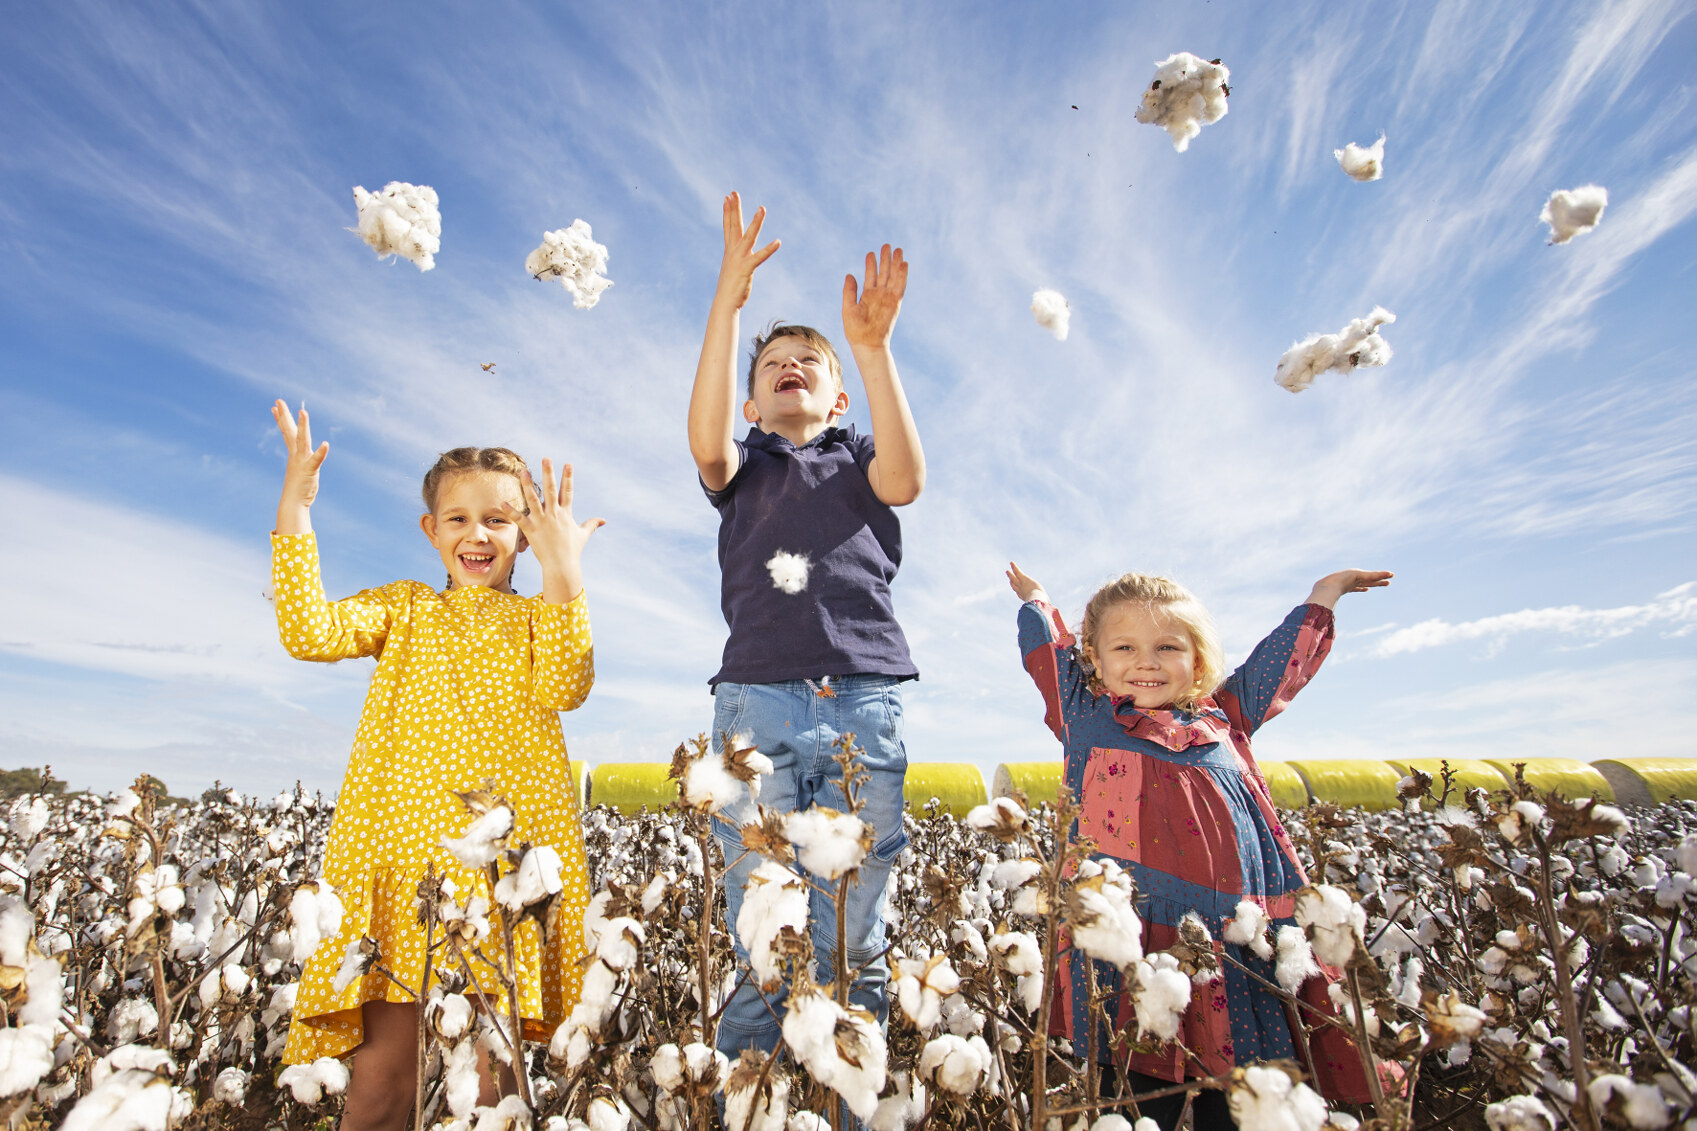 Children at one of the Ginning tours of the cotton fields in Leeton Shire during harvest season